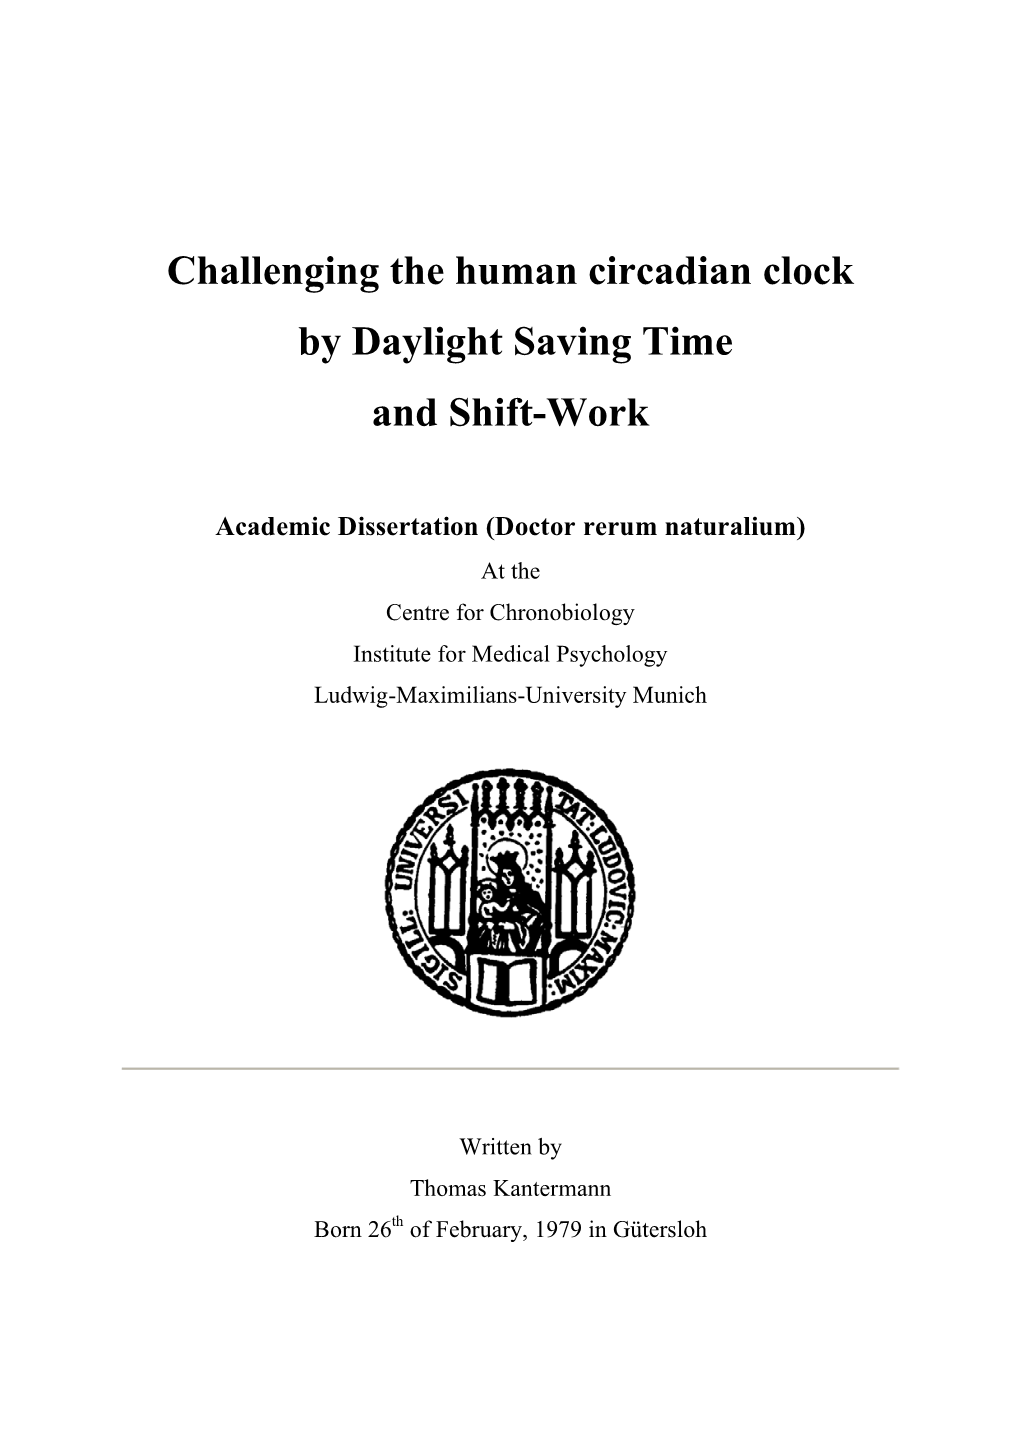 Challenging the Human Circadian Clock by Daylight Saving Time and Shift-Work